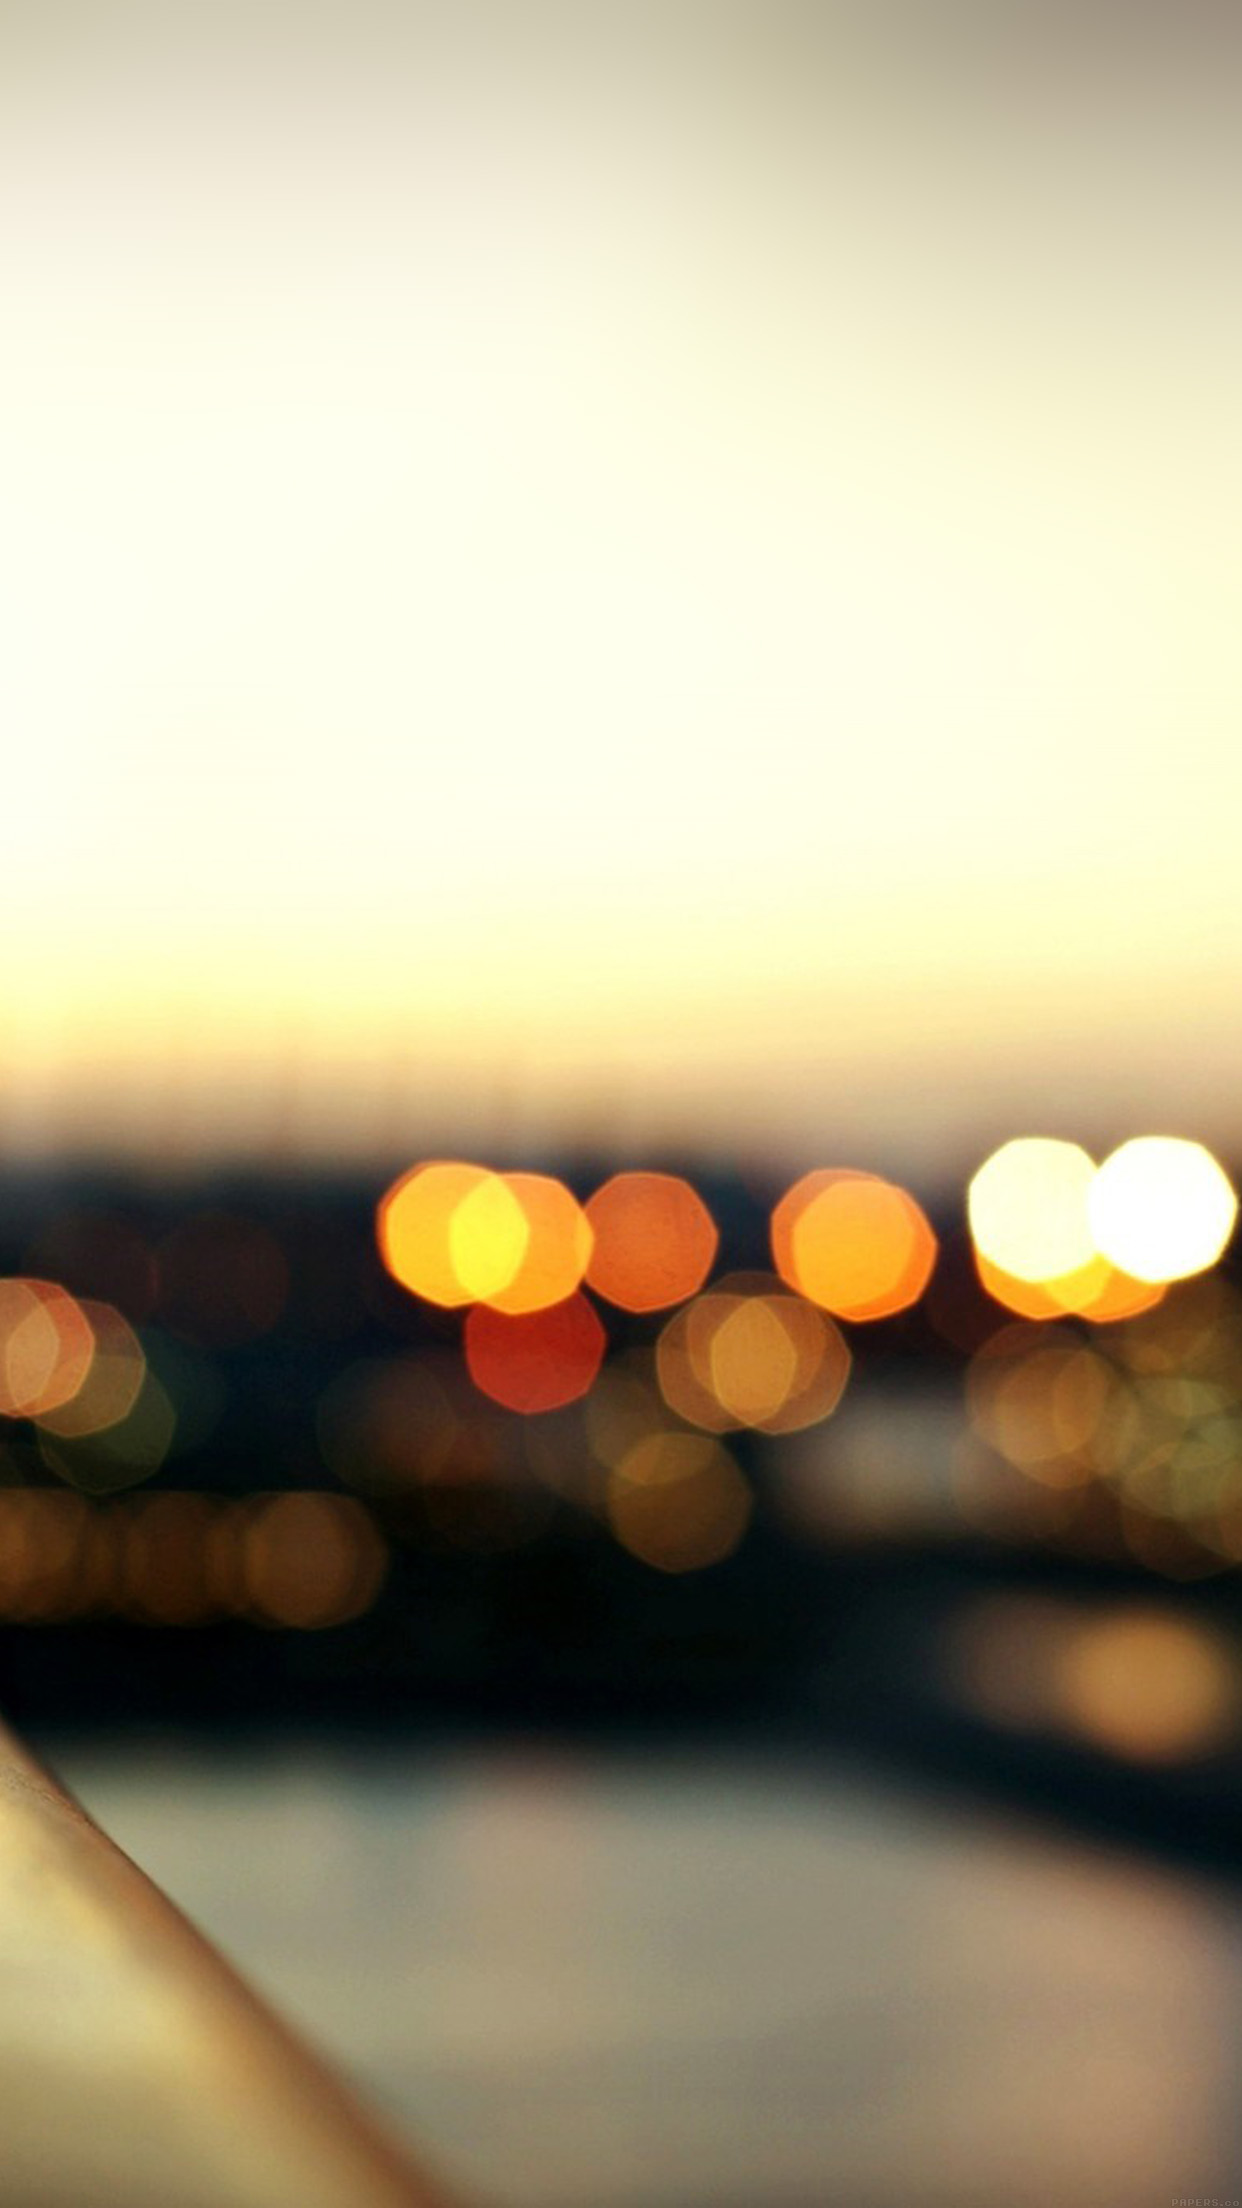 Bokeh Light Water City Nature Android wallpaper